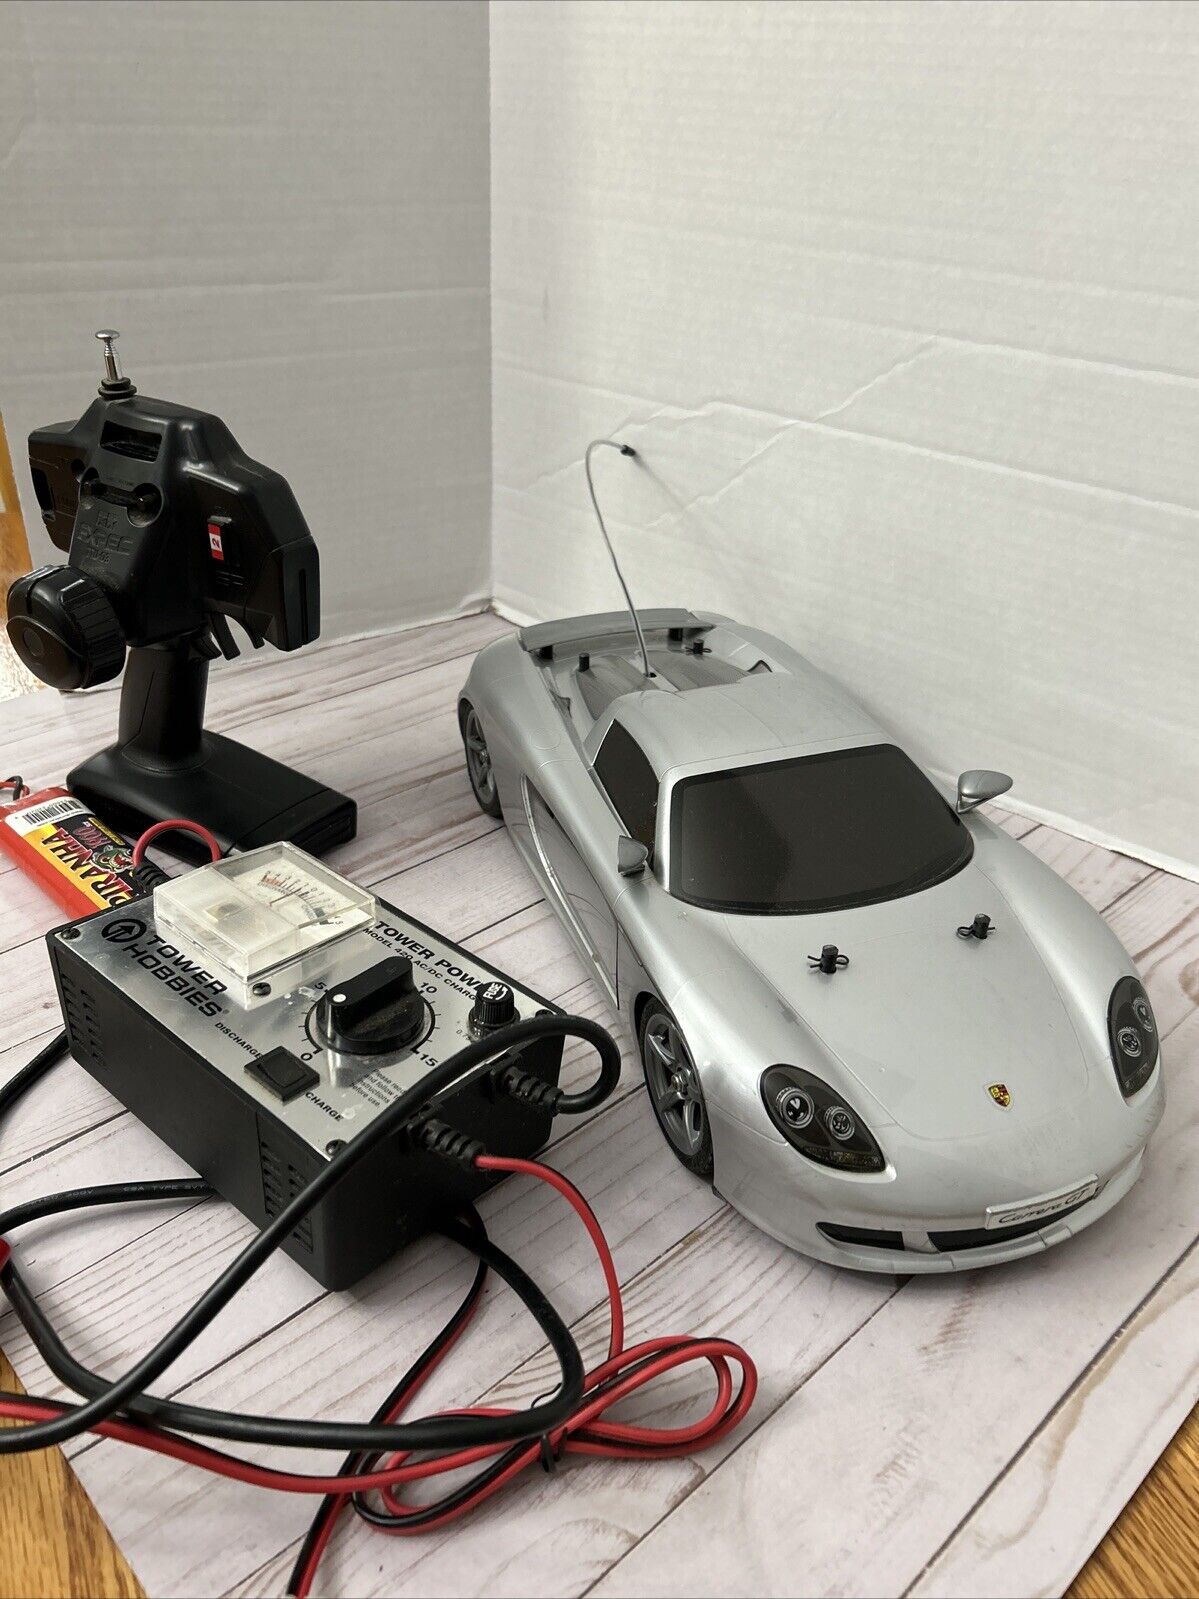 Tamiya 1/10 Electric Rc Porsche Carrera GT. With Remote, Charger And Batteries